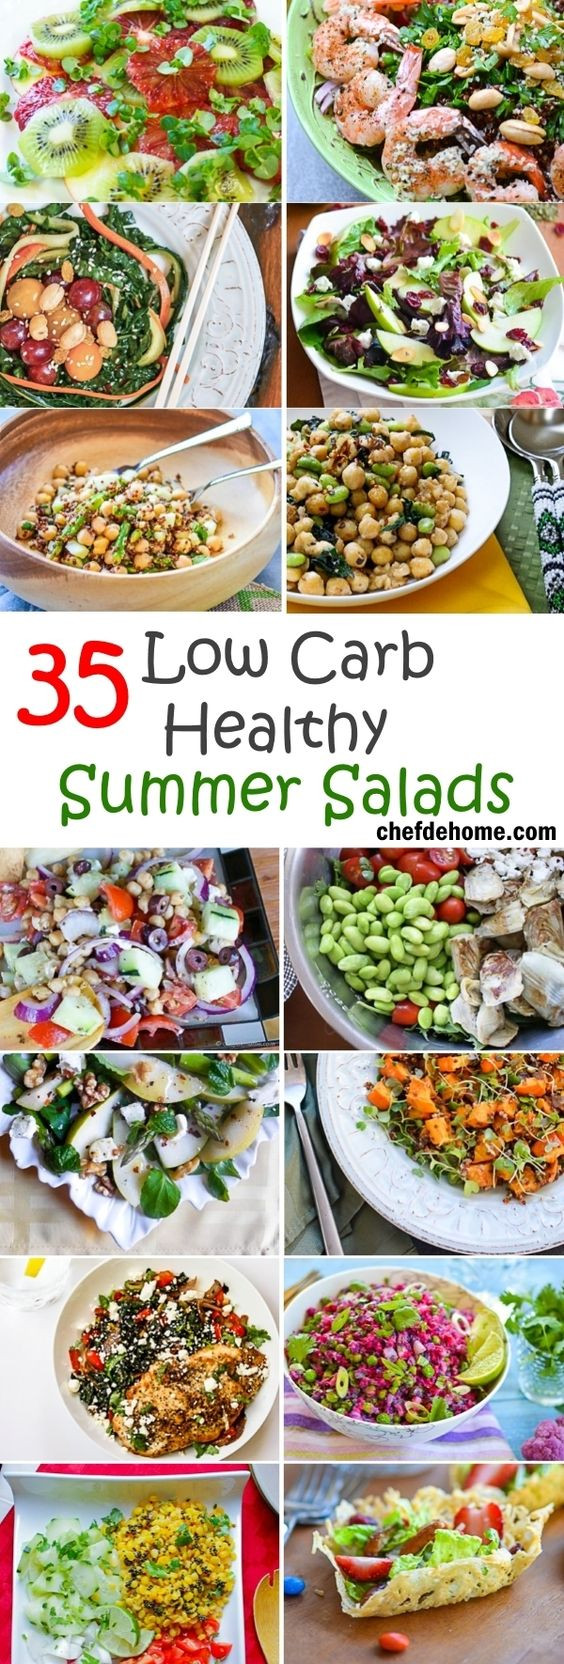 Low Carb Summer Recipes
 35 Low Carb Healthy Summer Salads